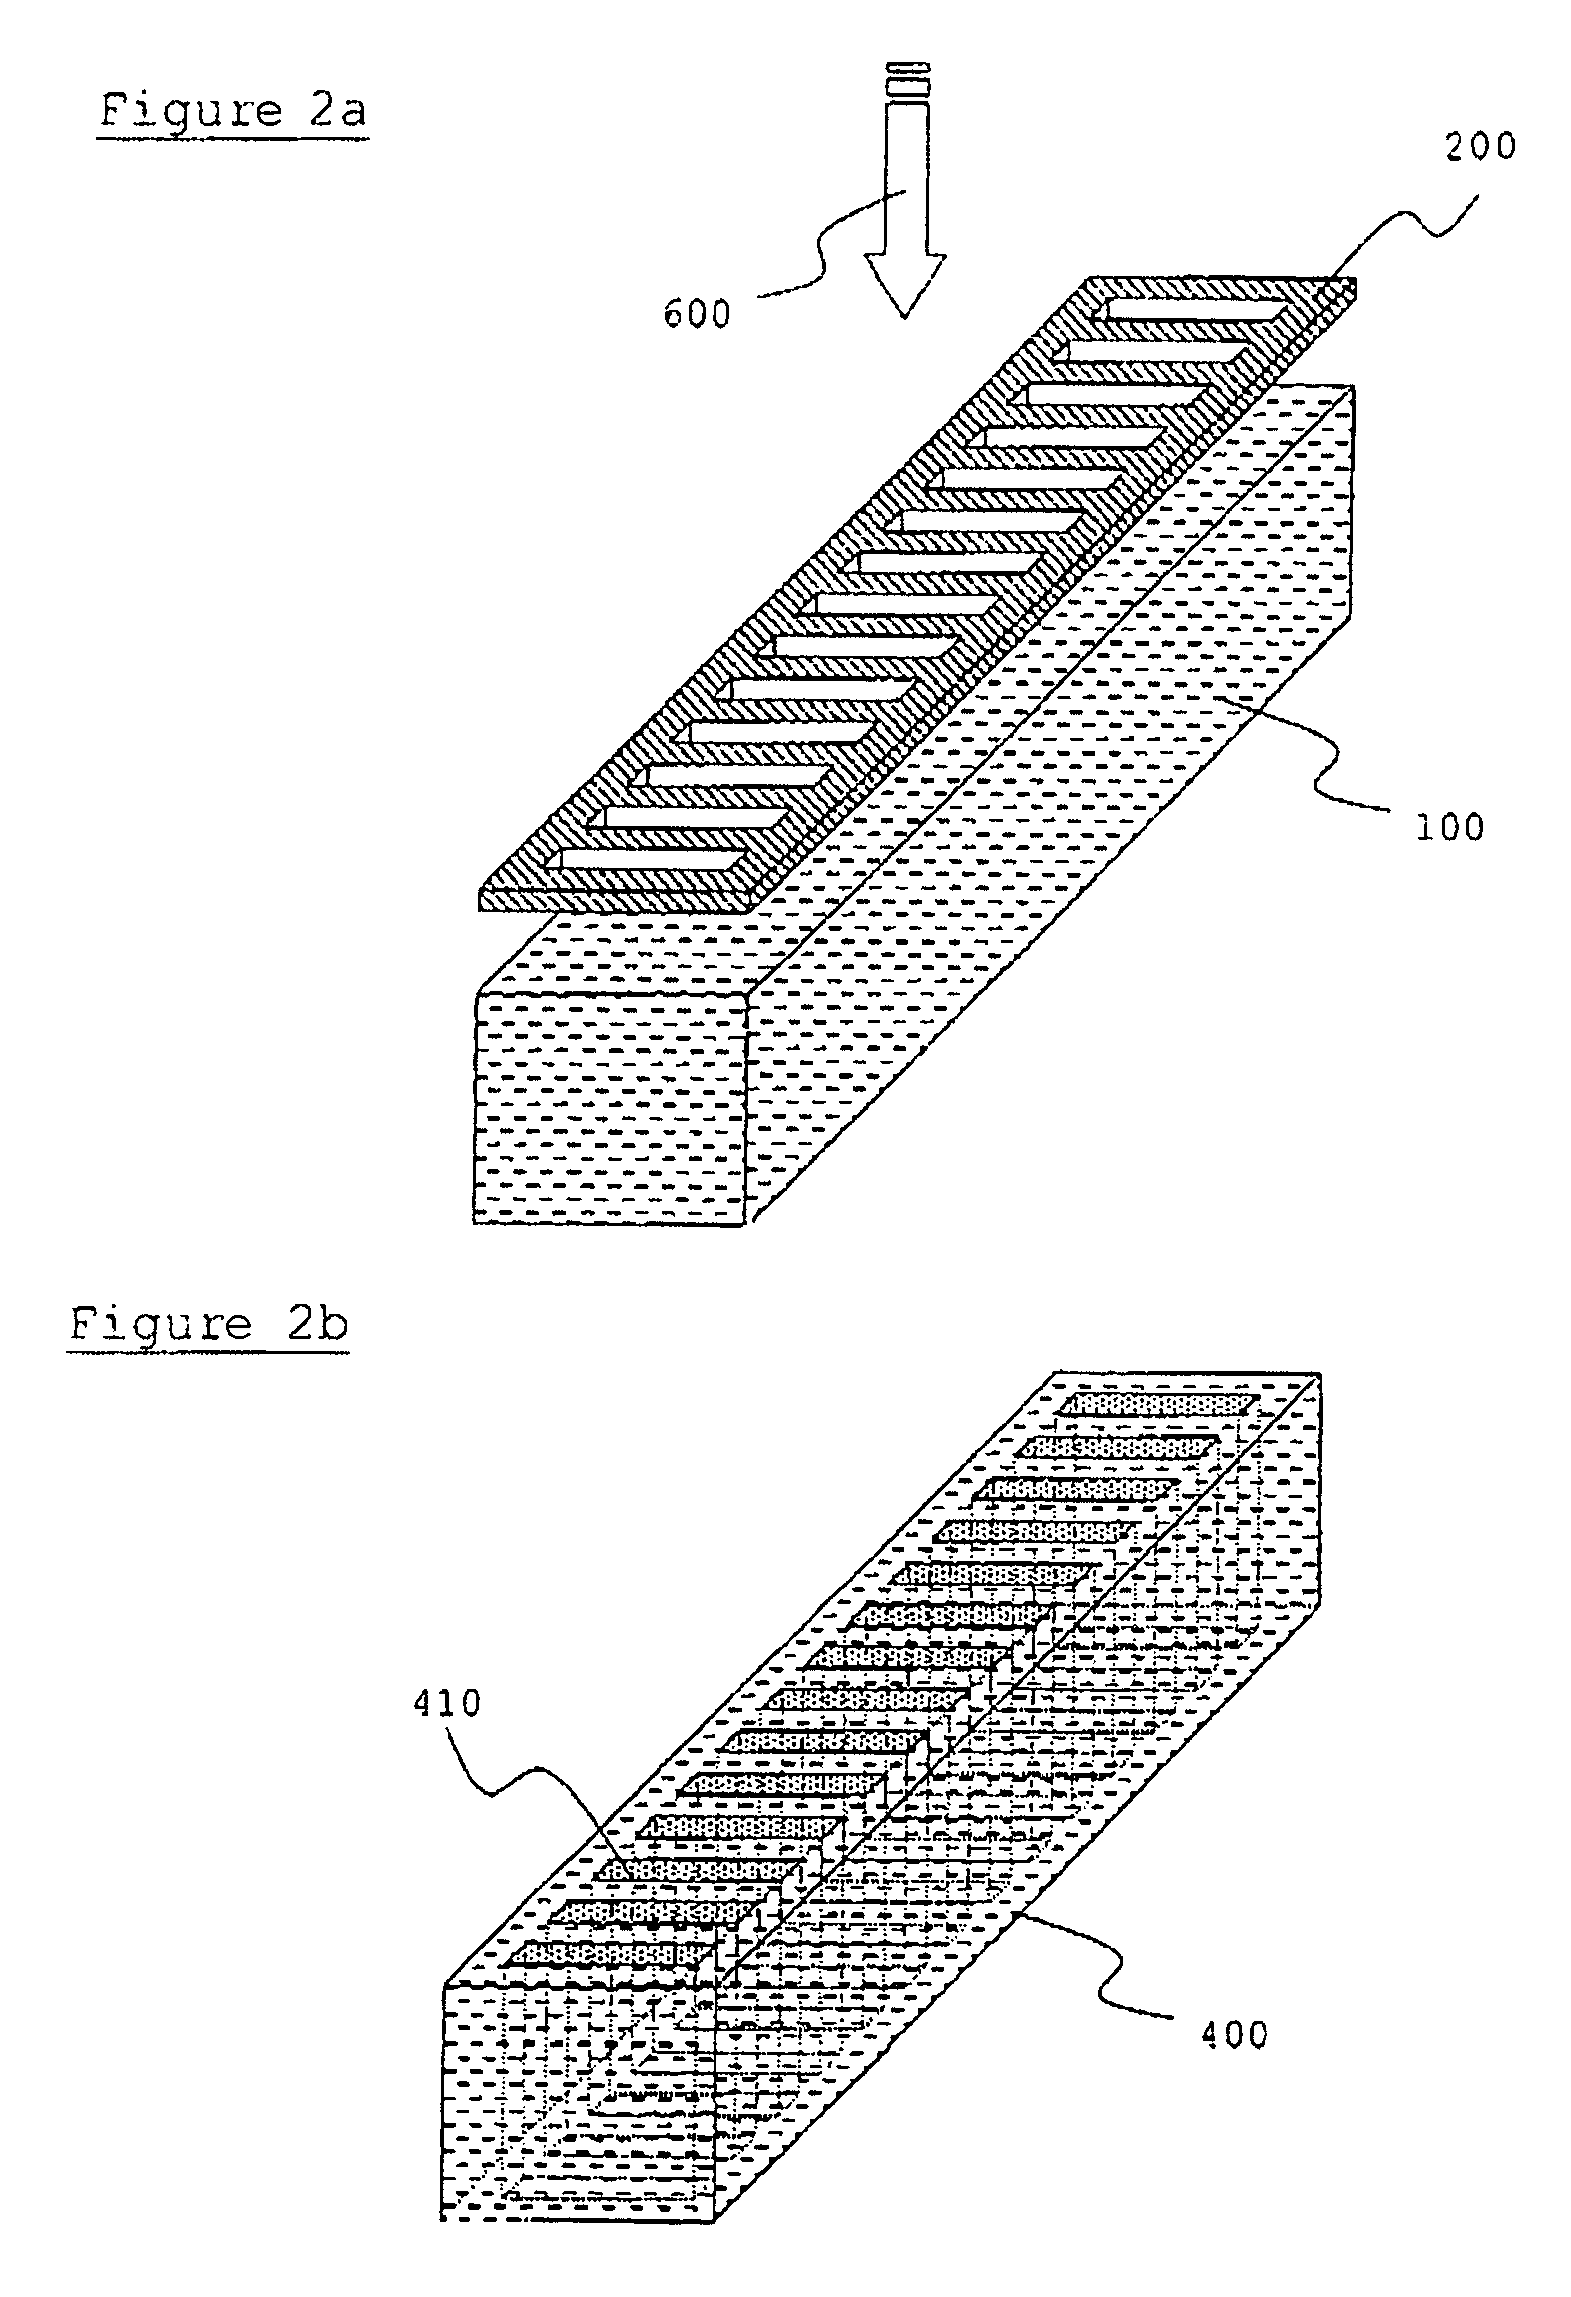 Method for producing an optical component, optical component produced according to the method and devices comprising such components